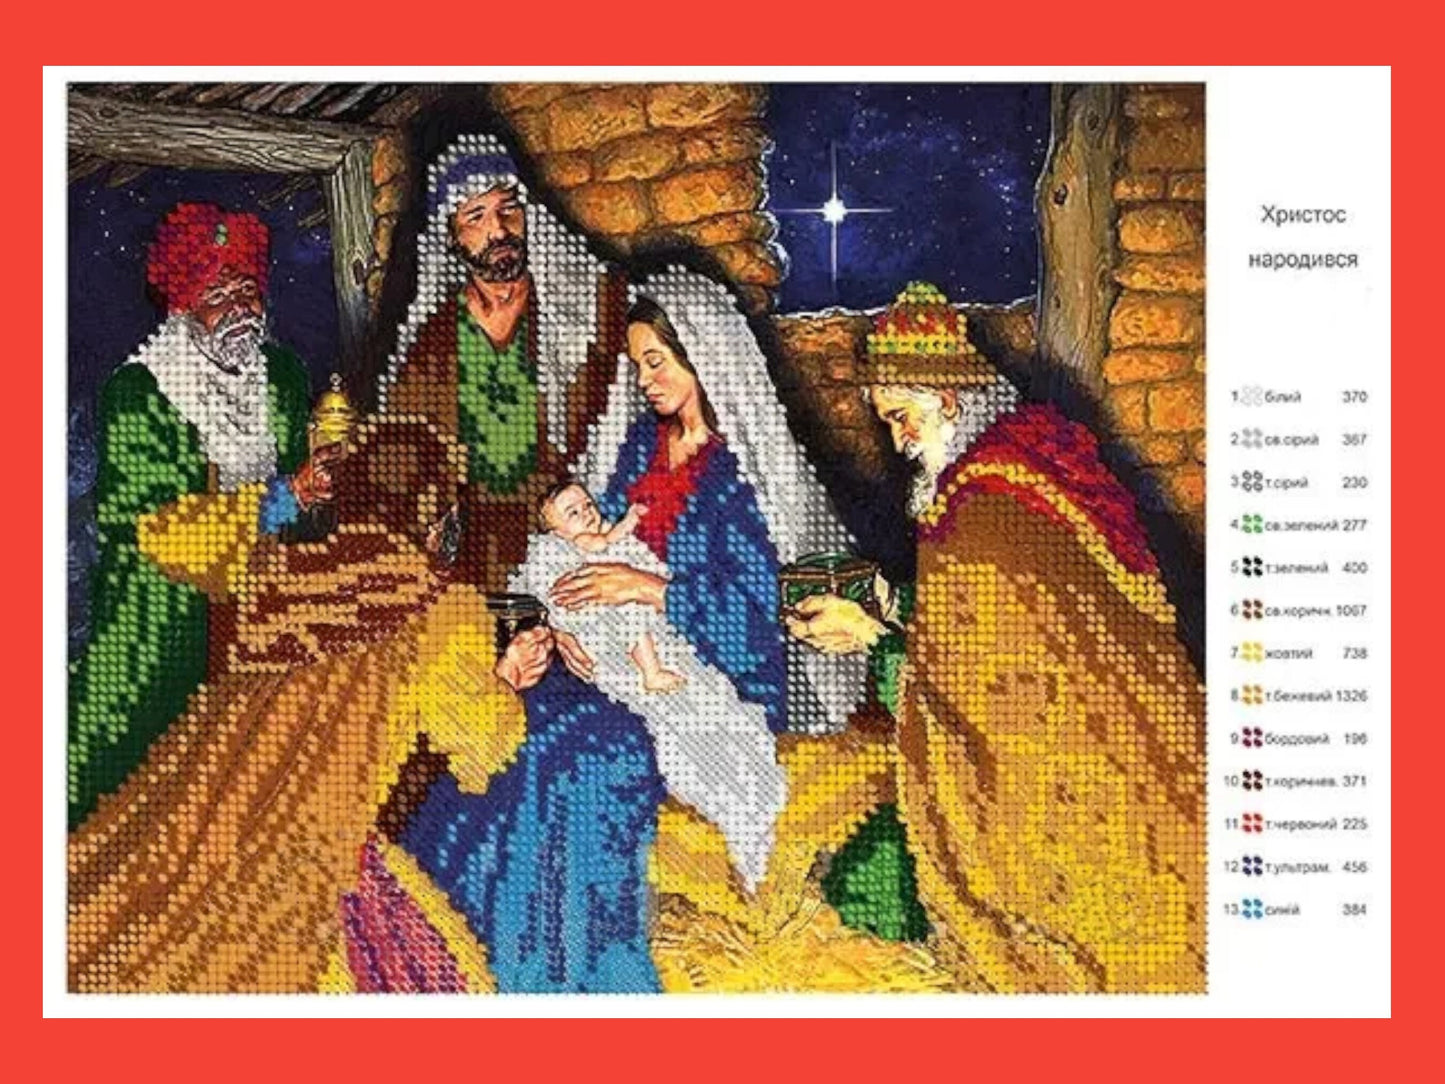 DIY Bead embroidery kit "Christ is born". - VadymShop